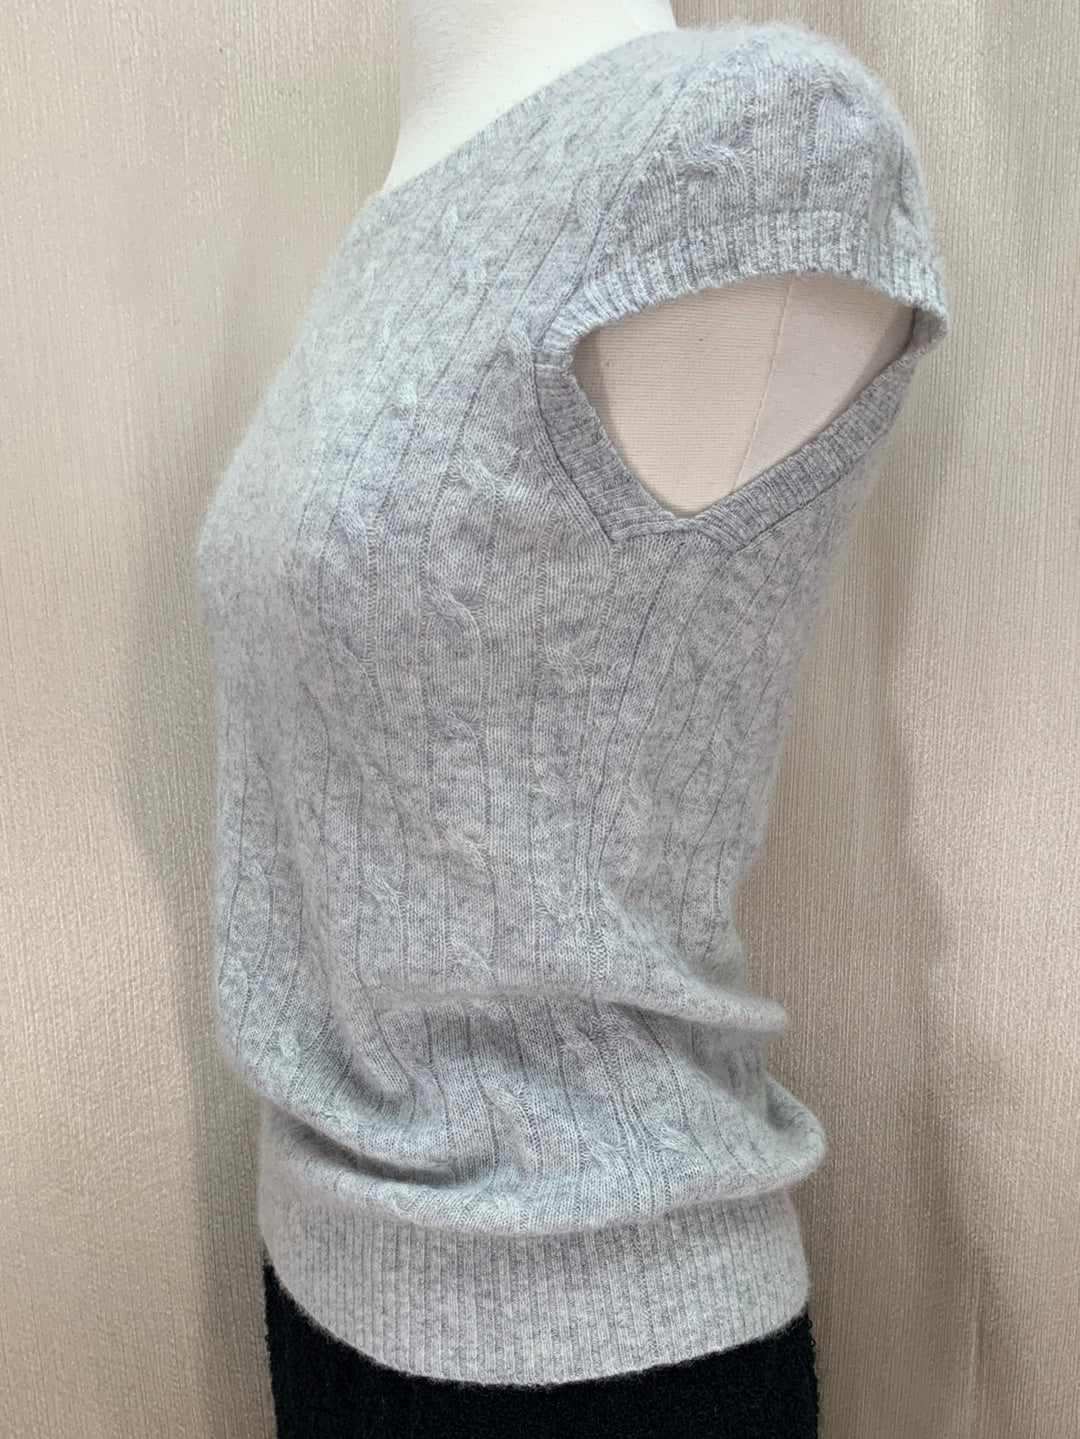 CHRISTOPHER FISCHER marled gray Cashmere Thin Cable Knit Sweater - M